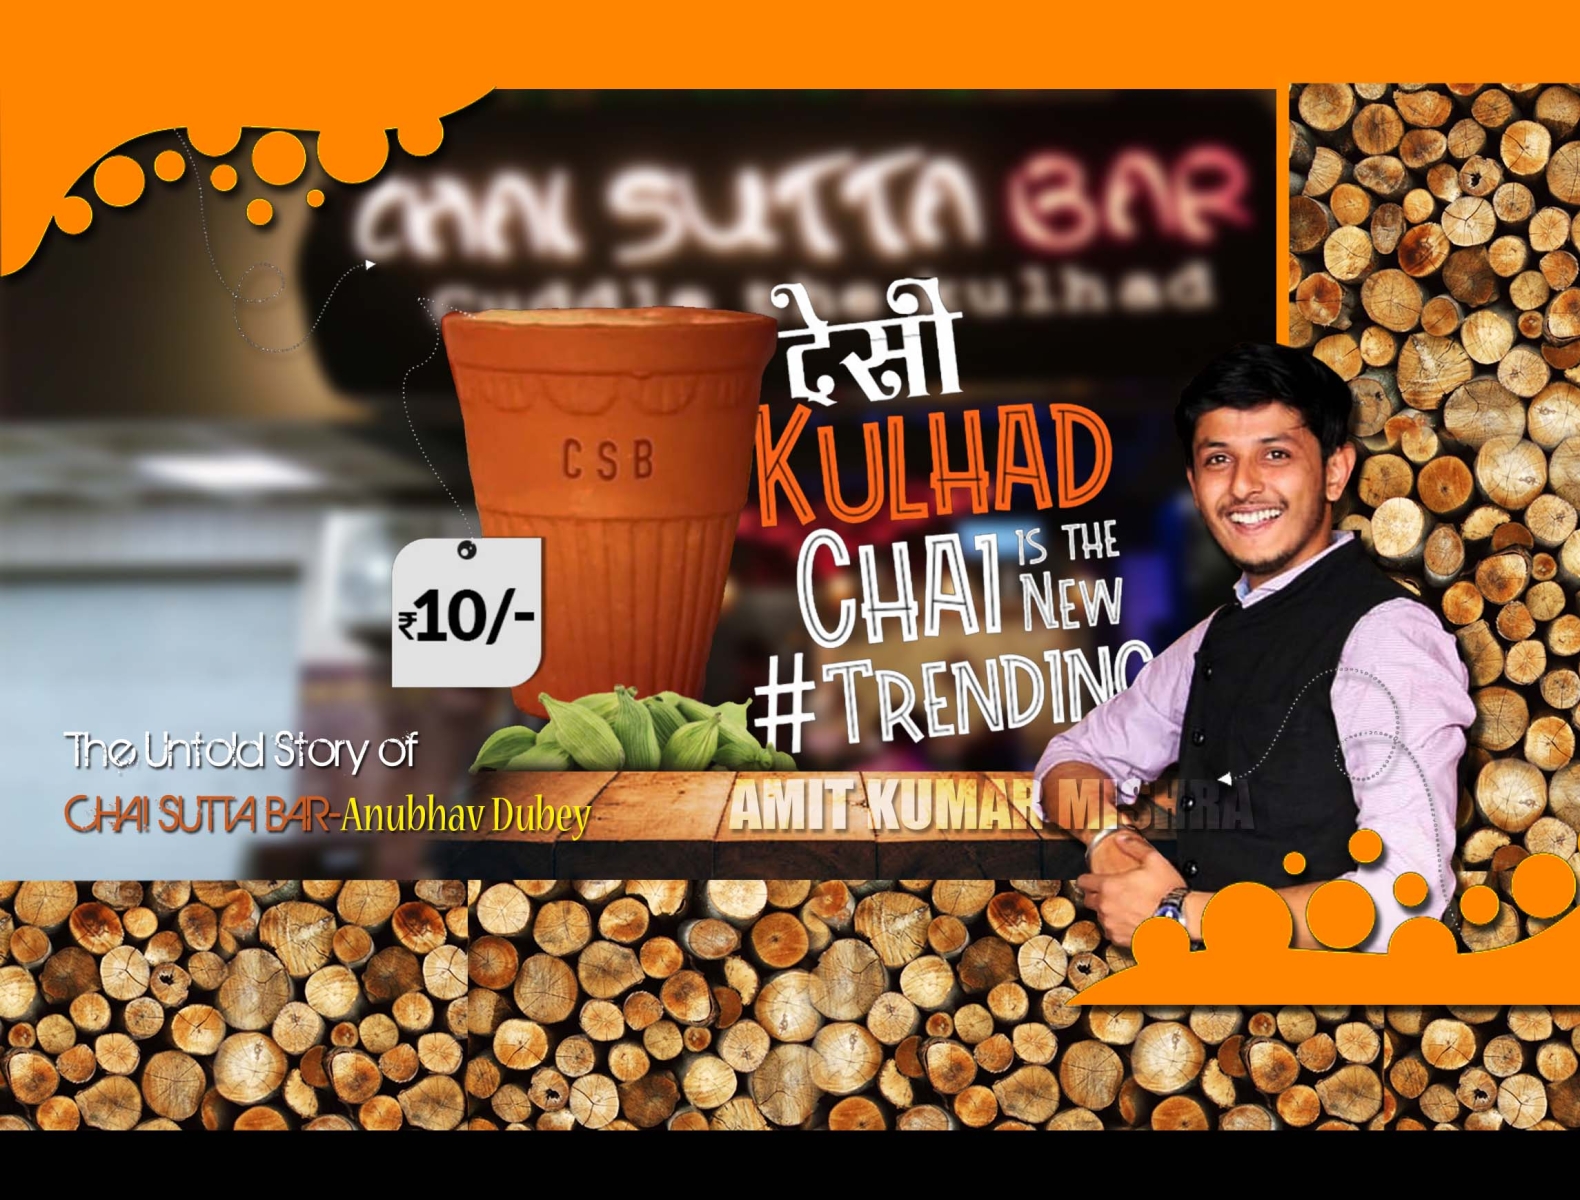 Chai Sutta Bar encourages people to spread love and kindness